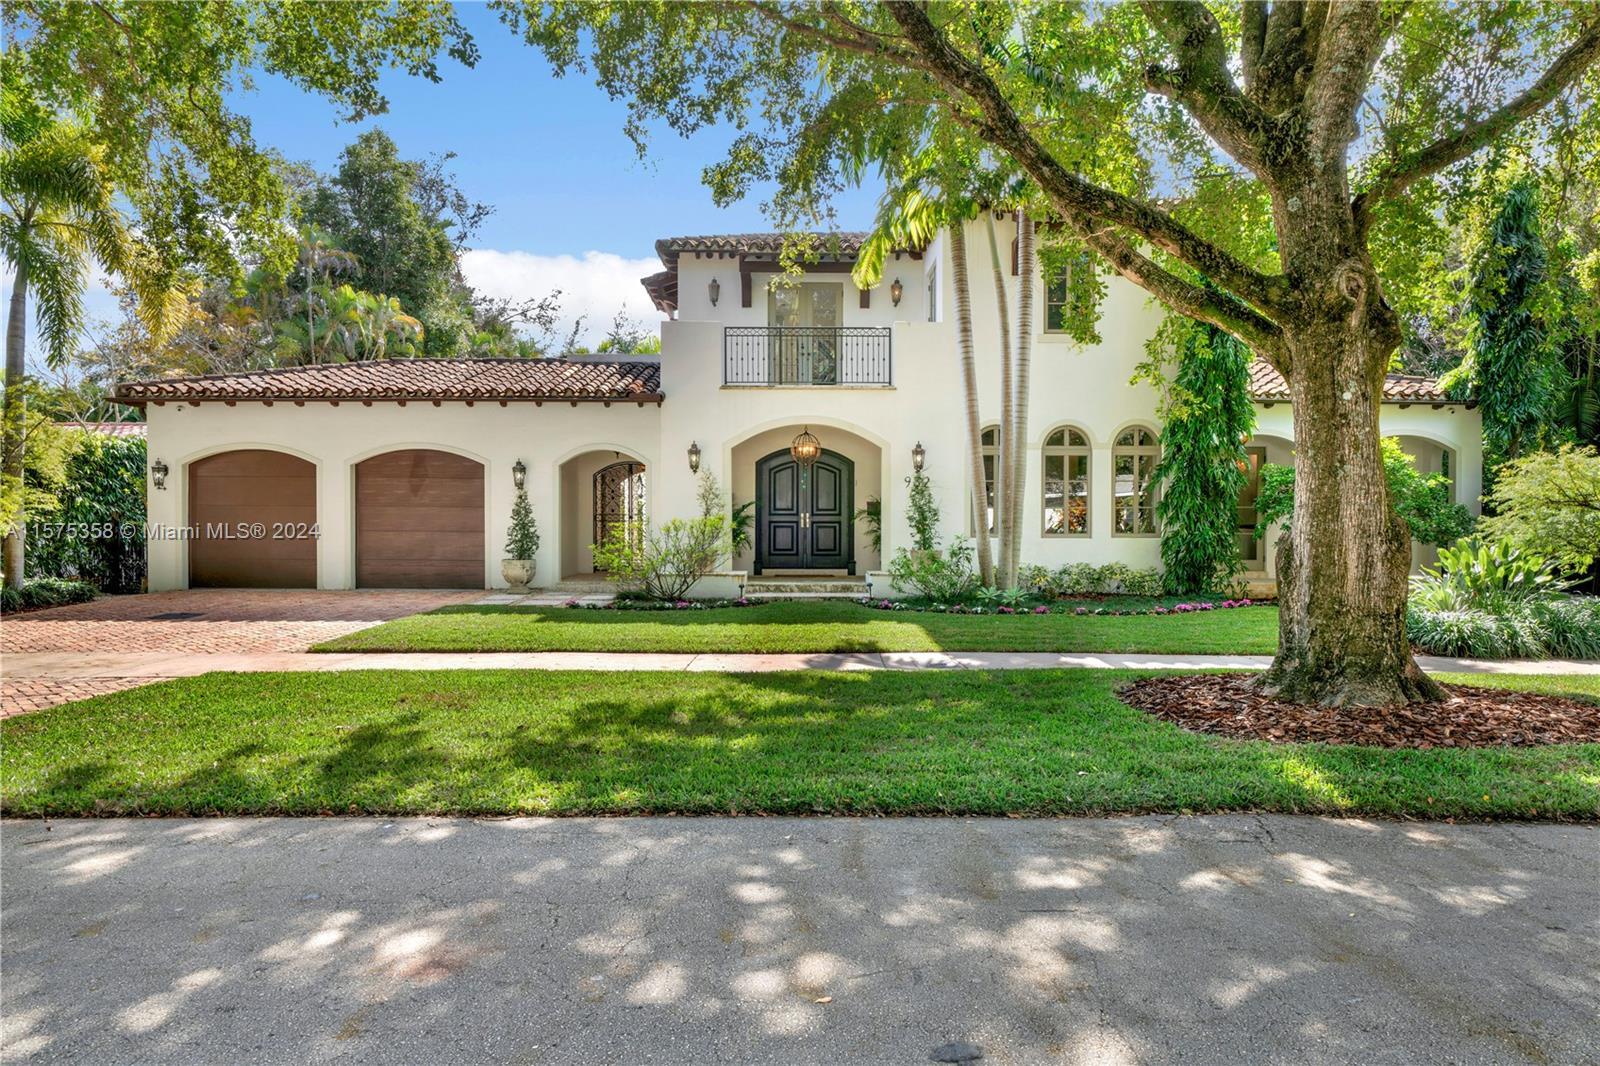 Photo of 932 Escobar Ave in Coral Gables, FL